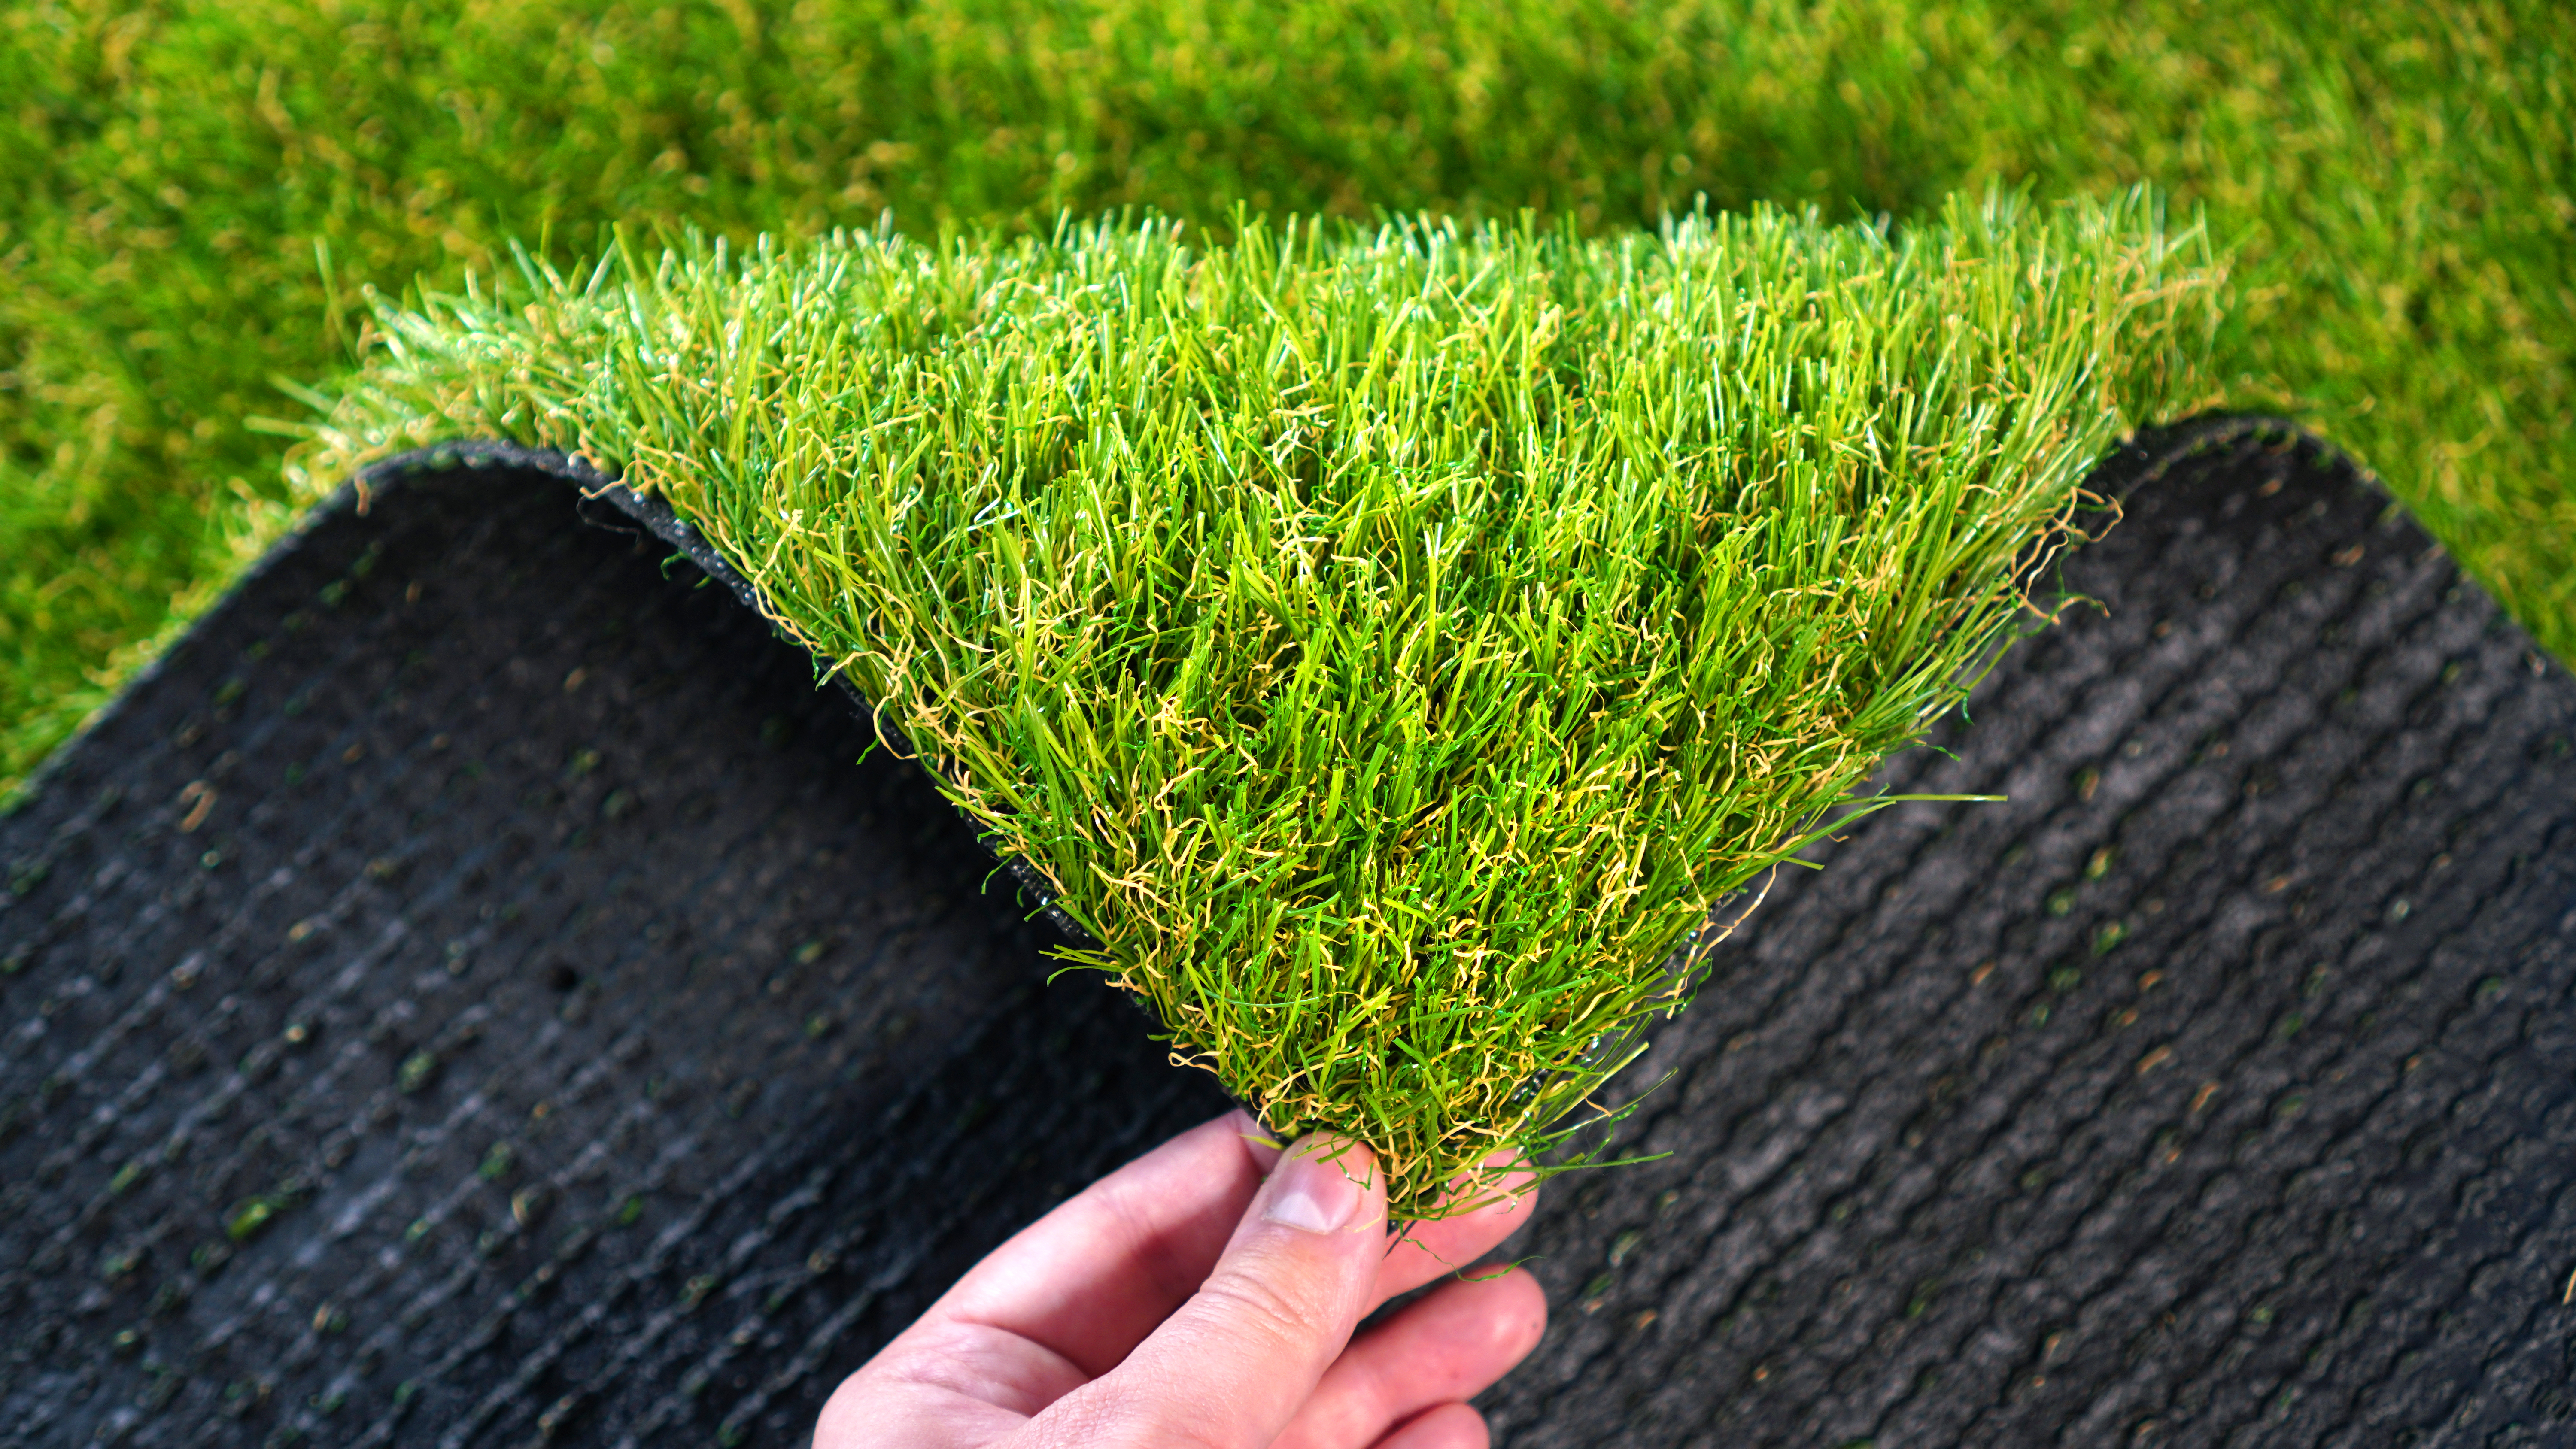 The Global Market for Artificial Turf